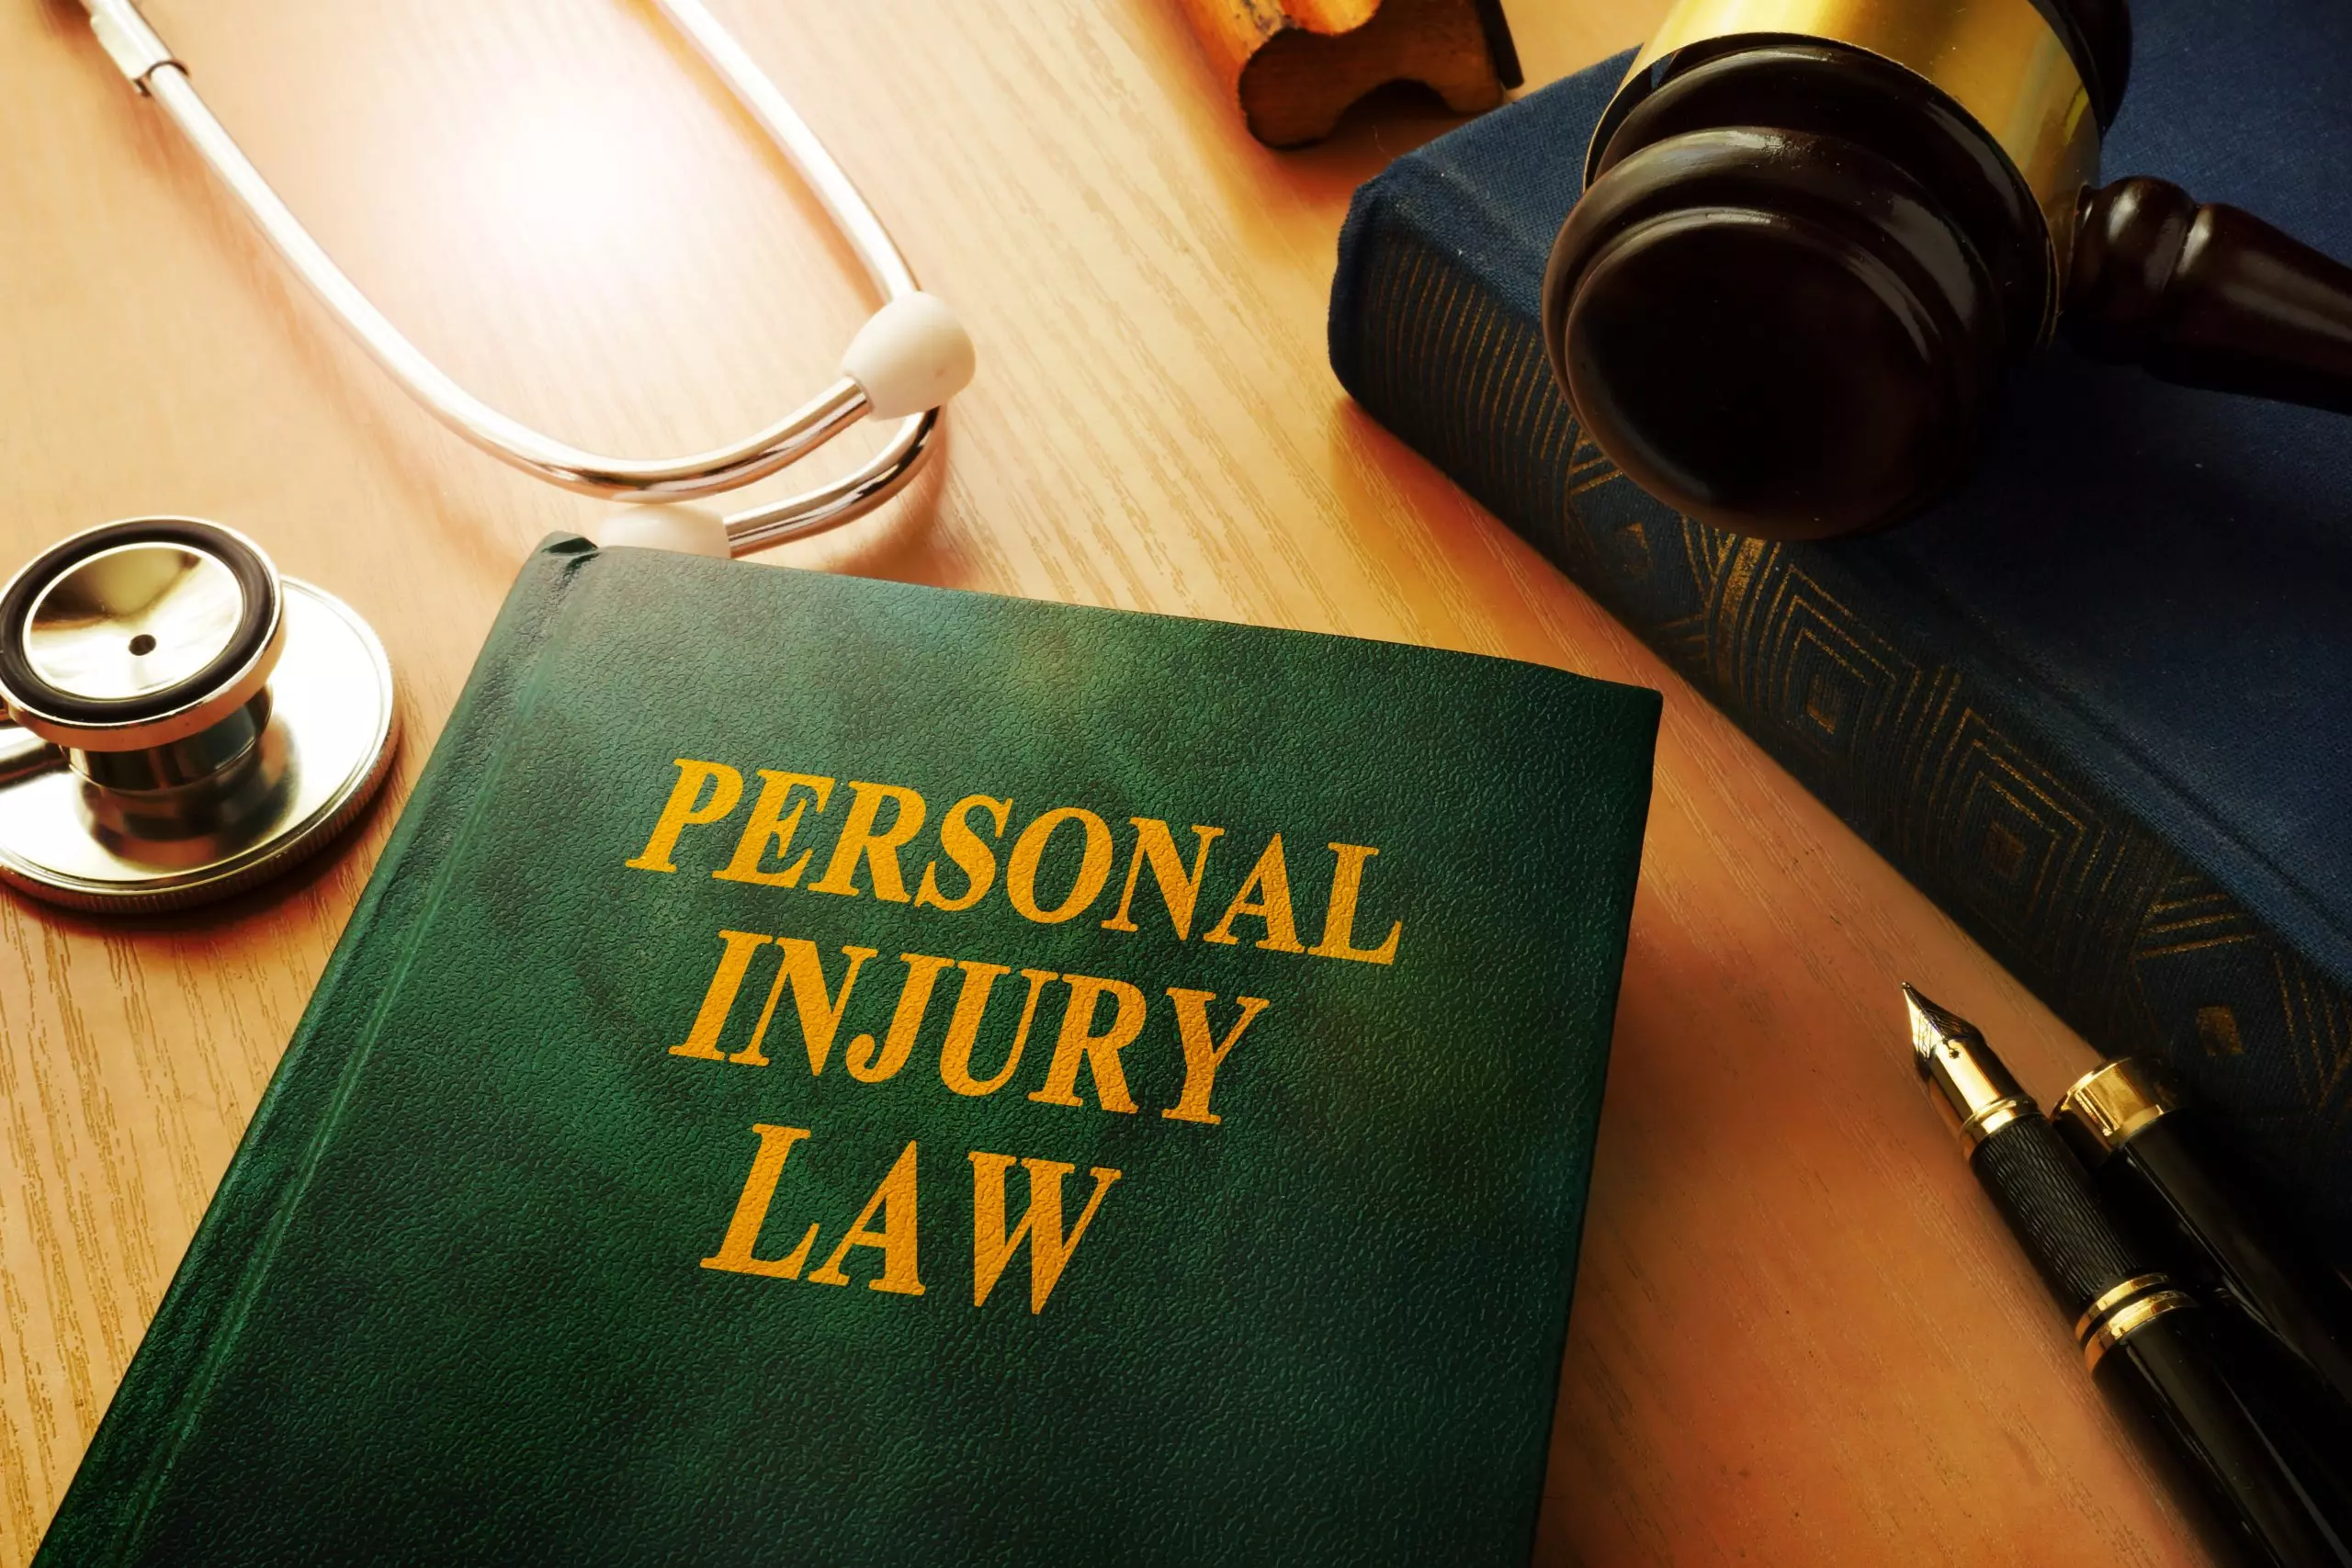 The Most Important Factors To Look For In A Personal Injury Lawyer